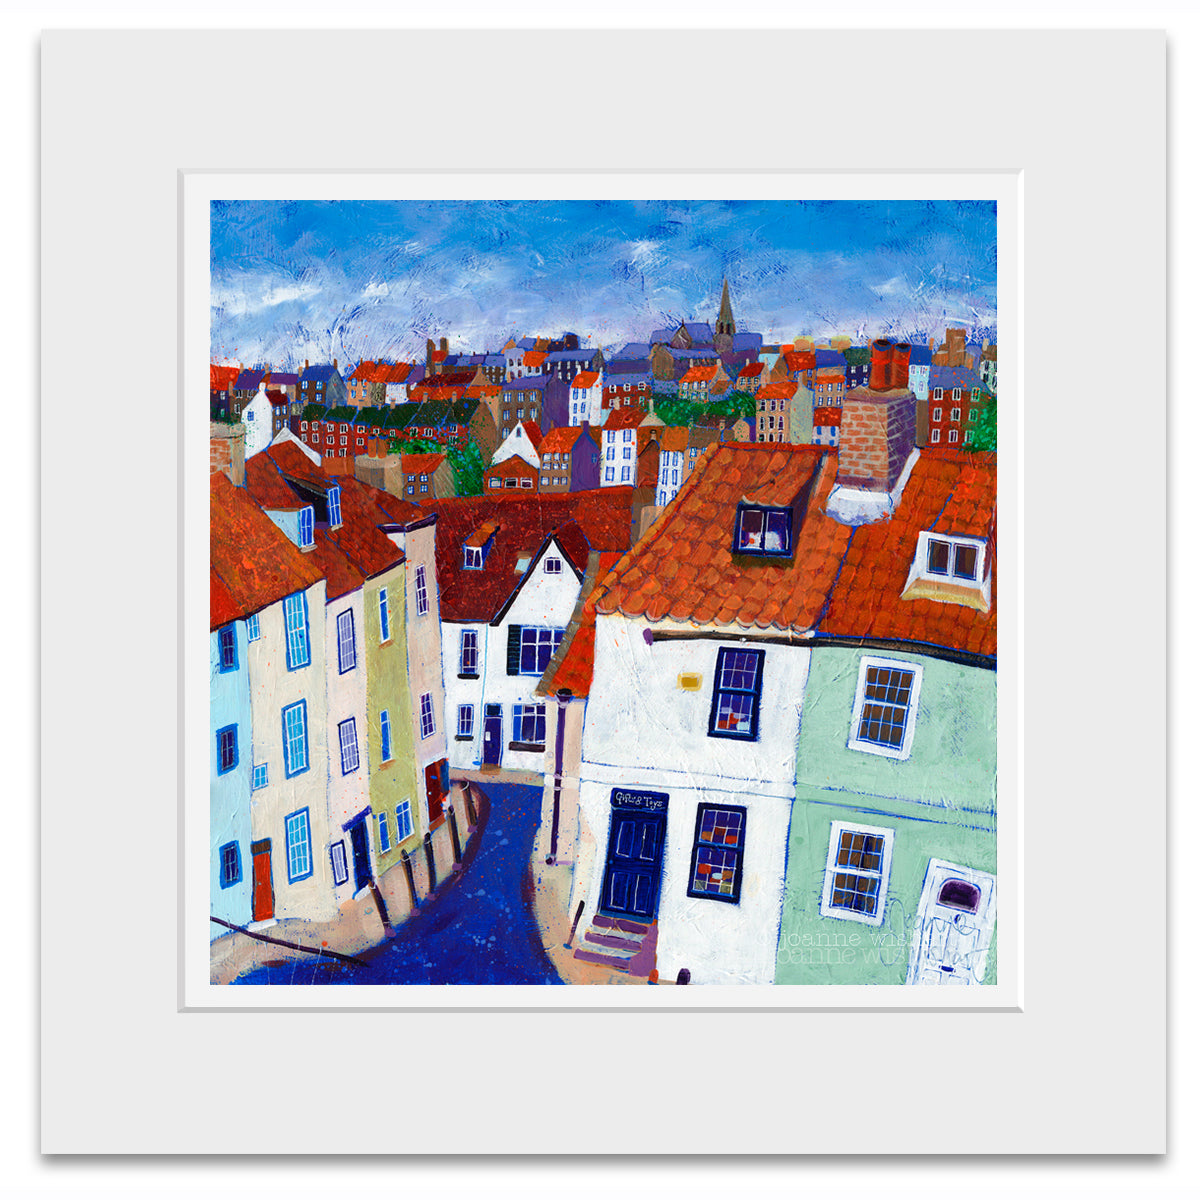 A mounted print of Whitby rooftops.